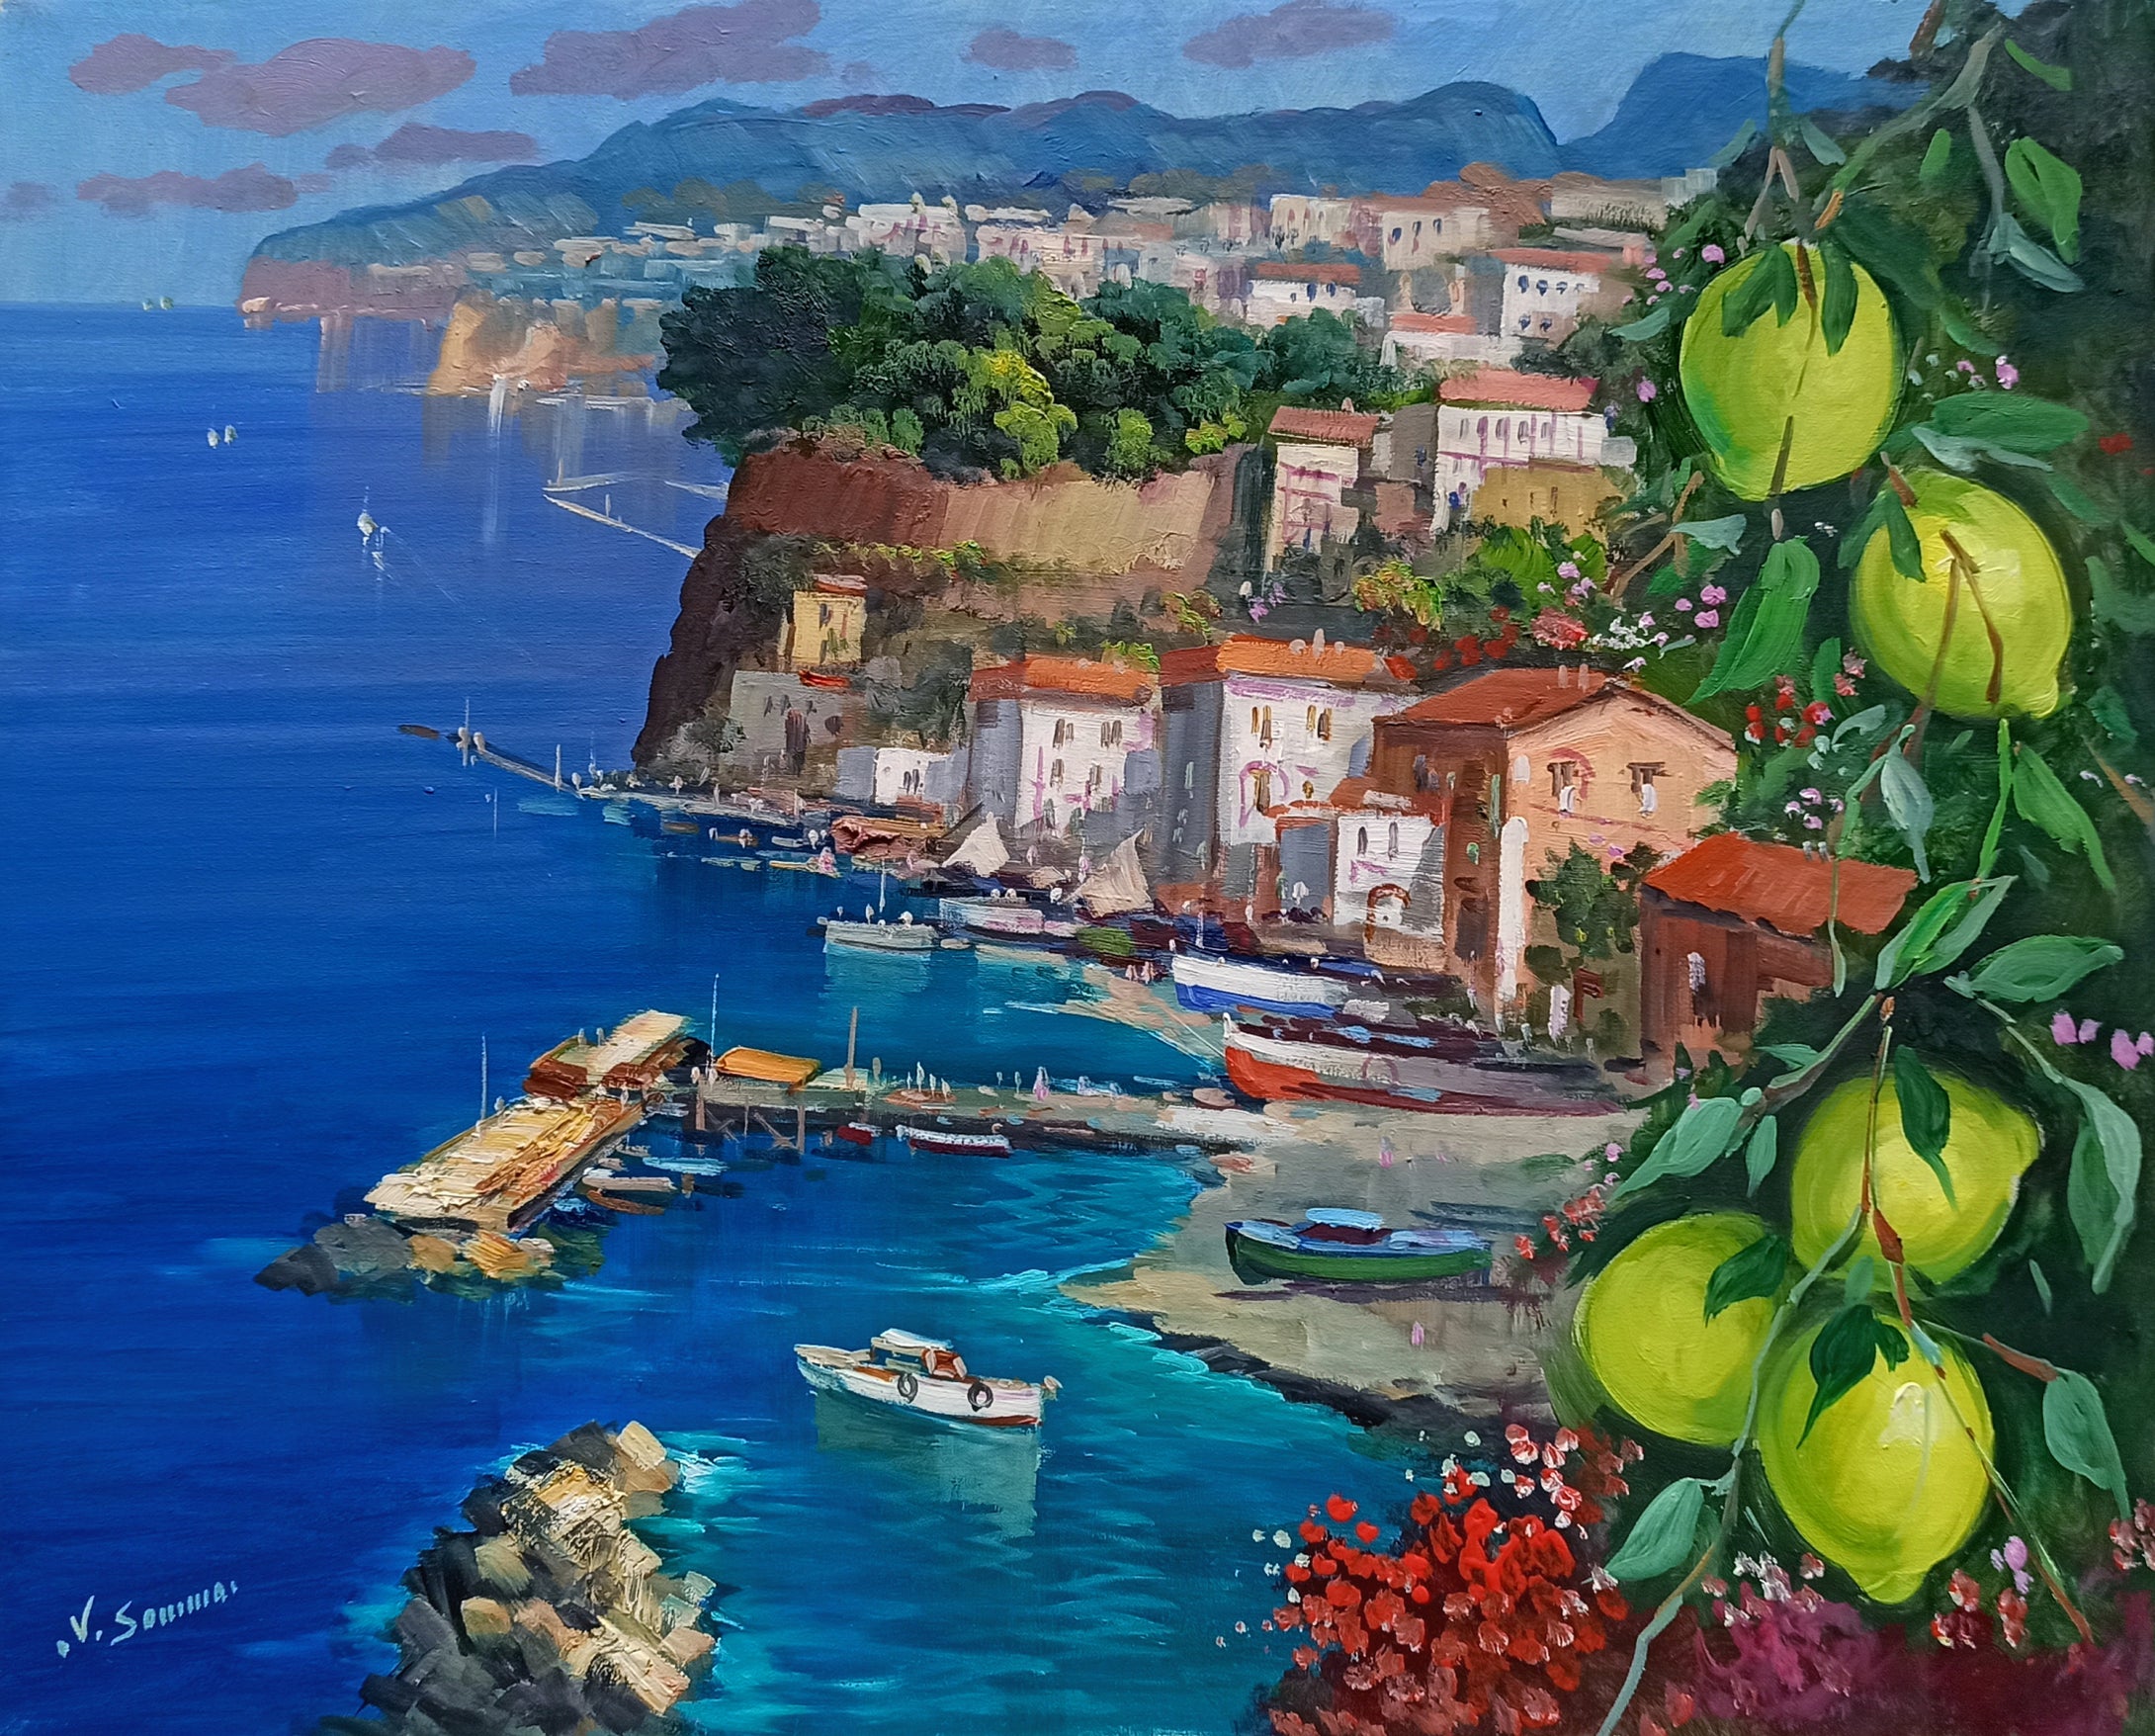 Sorrento painting by Vincenzo Somma 